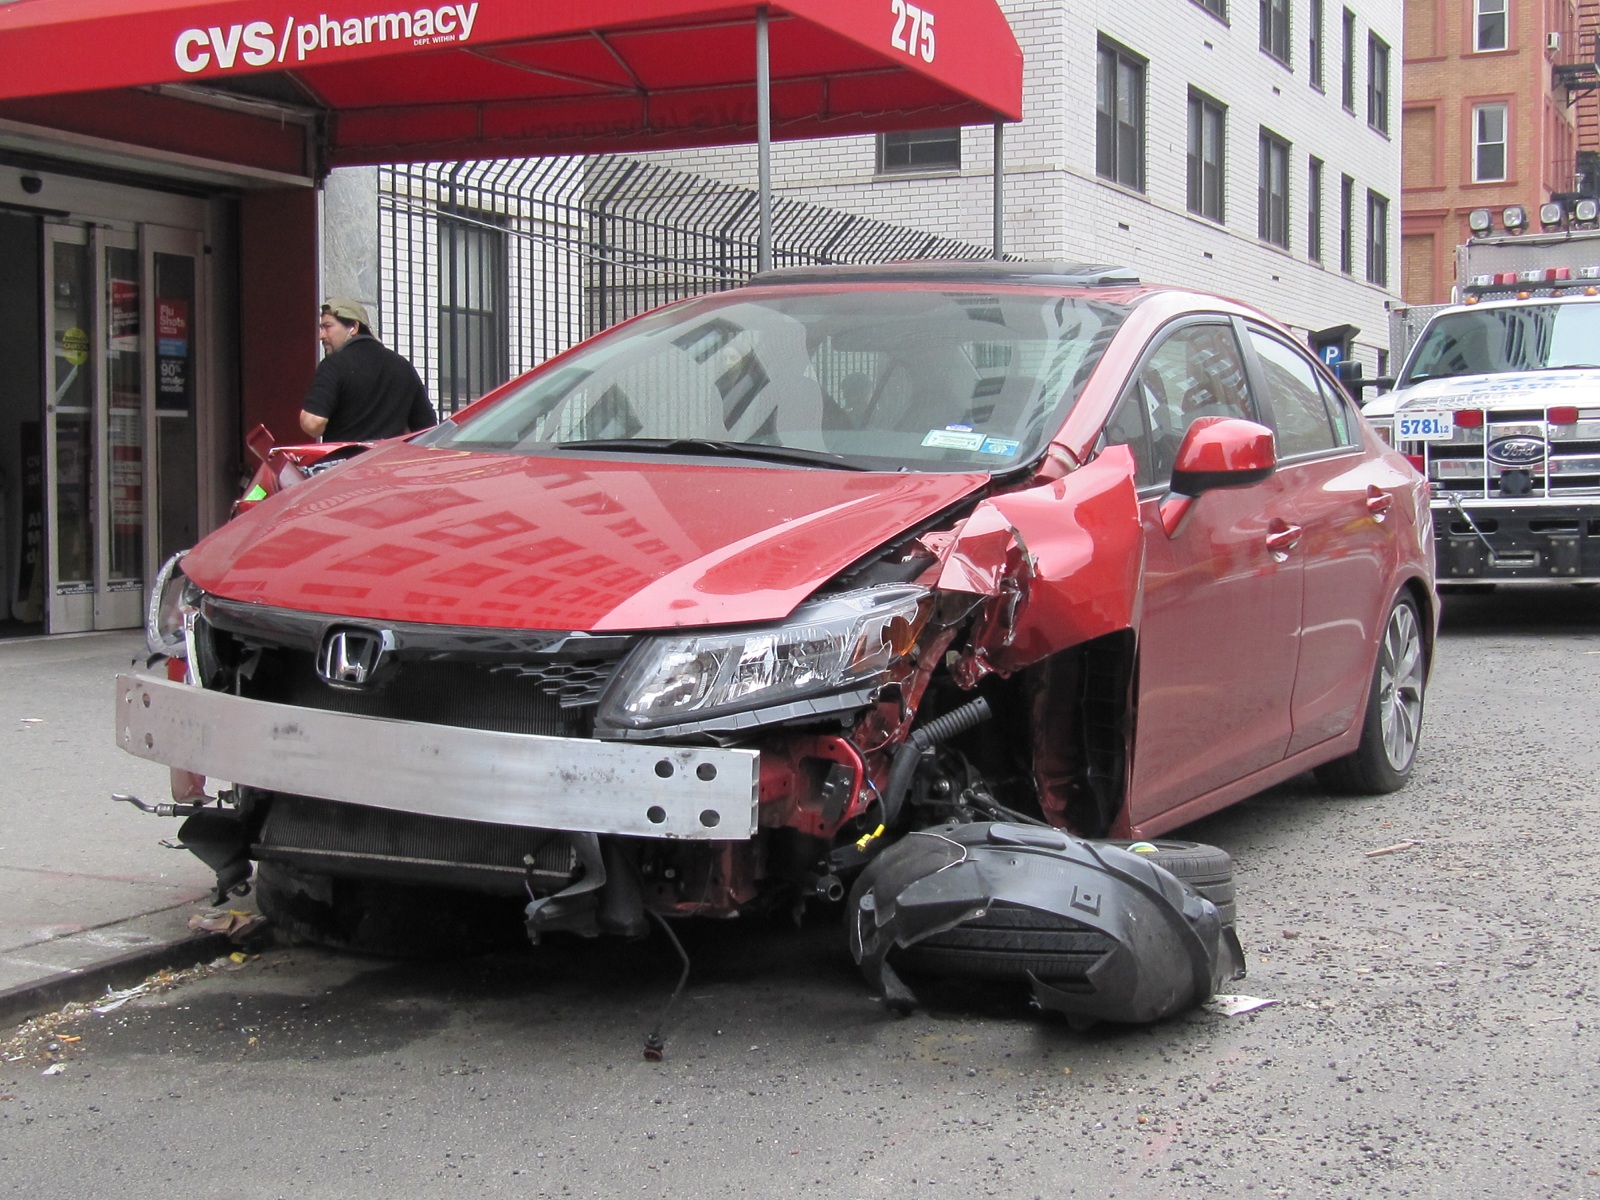 How Did This 2012 Honda Civic Si Get So Strangely Mangled?